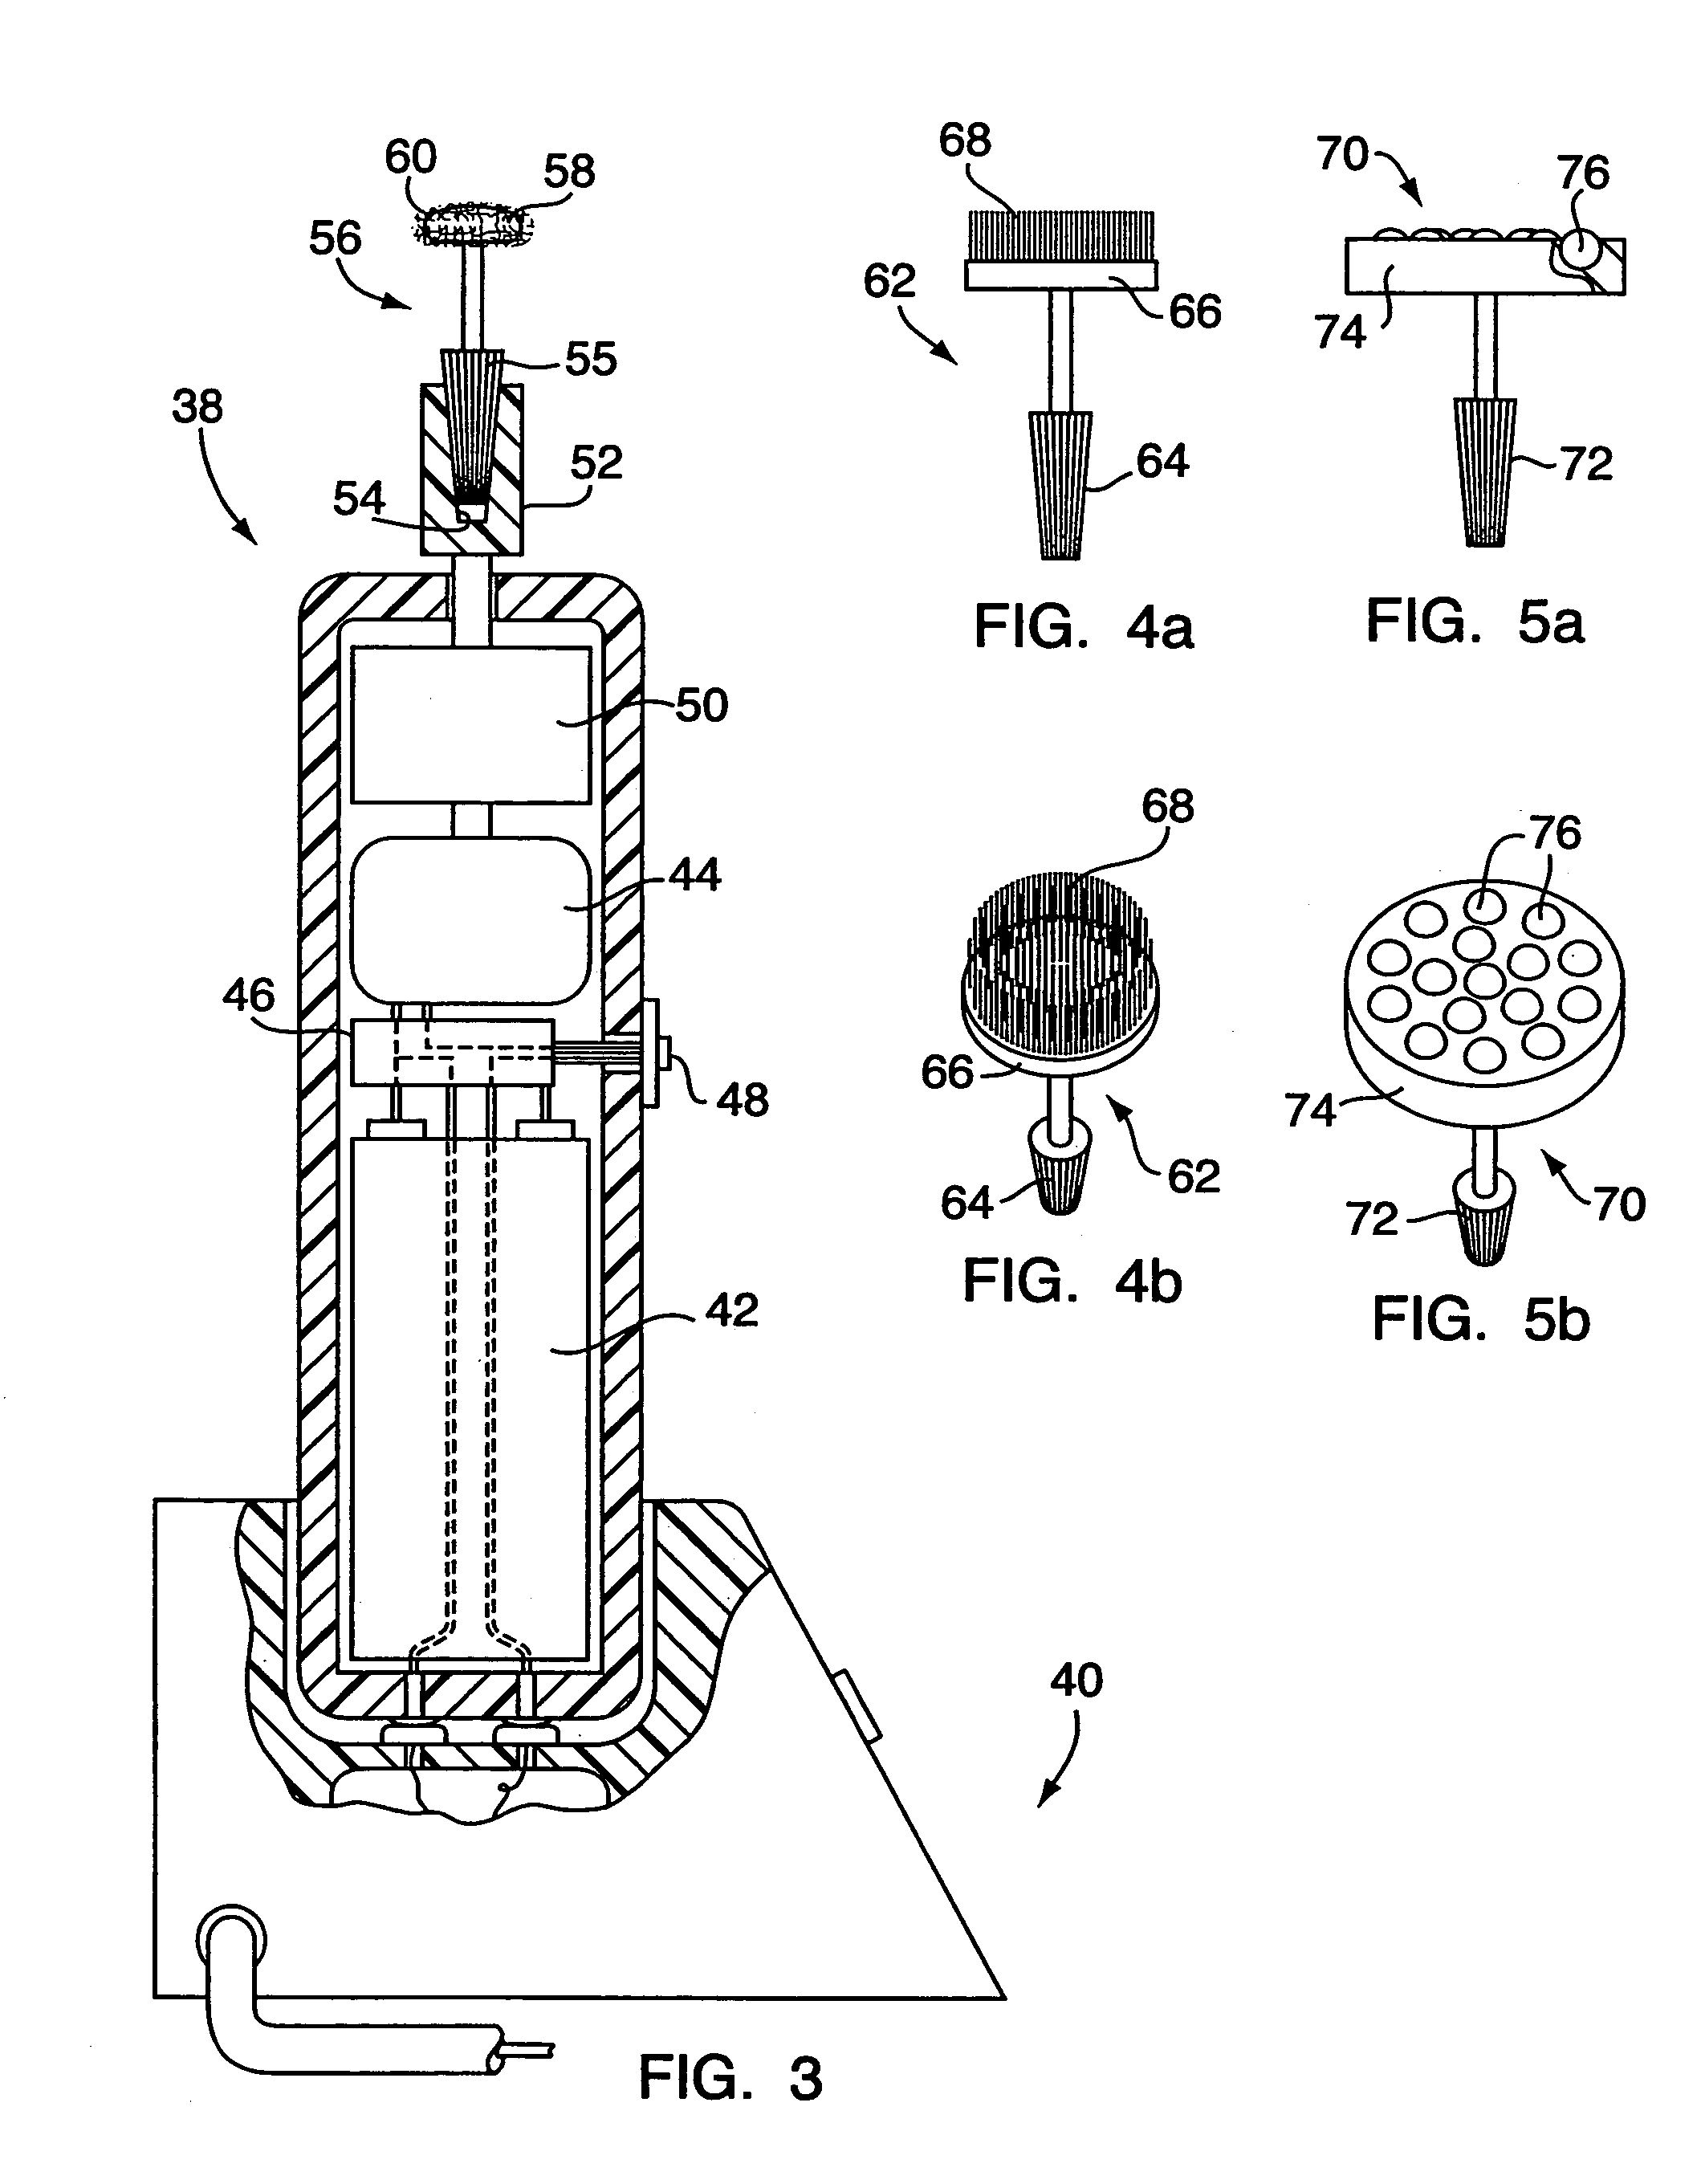 Method and apparatus for training facial muscles to reduce wrinkles